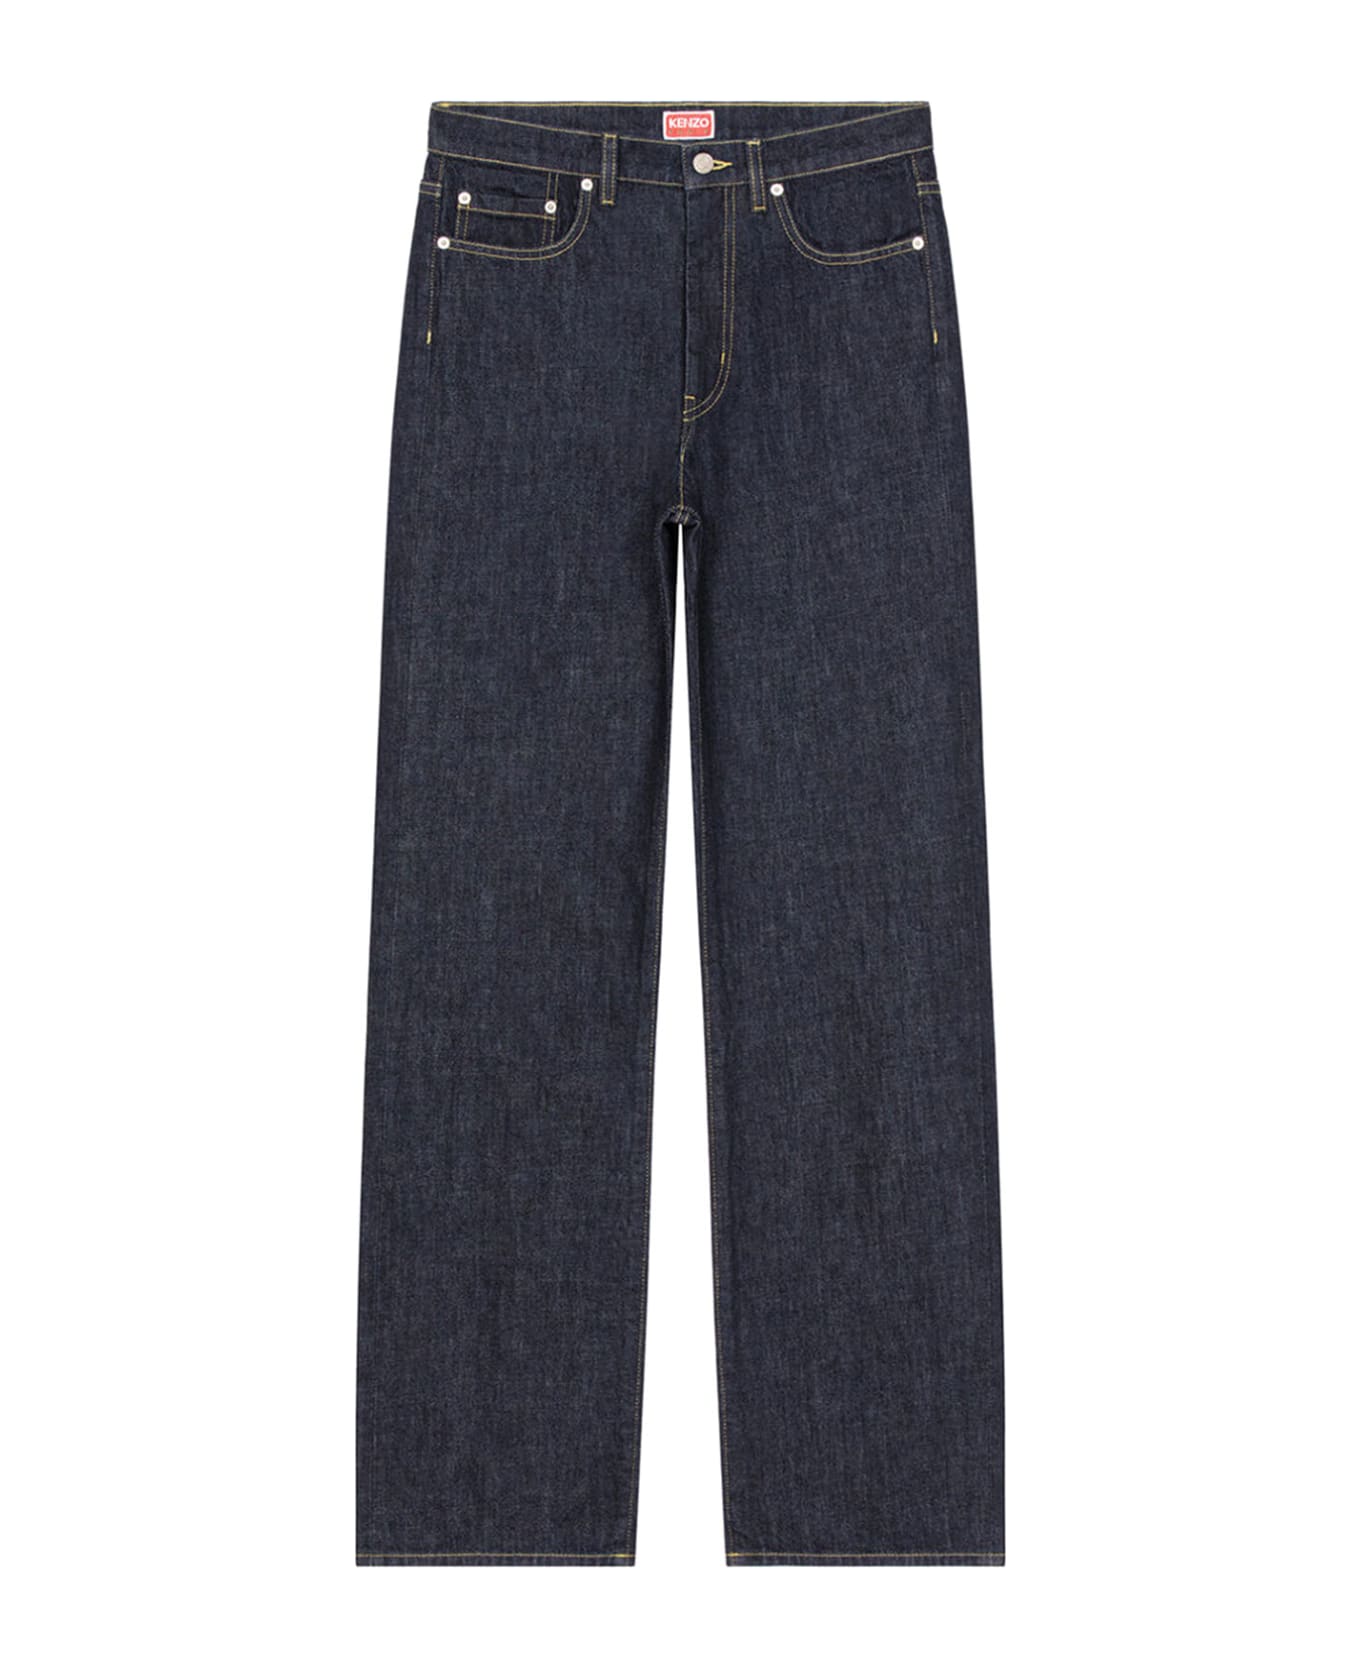 Kenzo Jeans In Cotton - Ink デニム